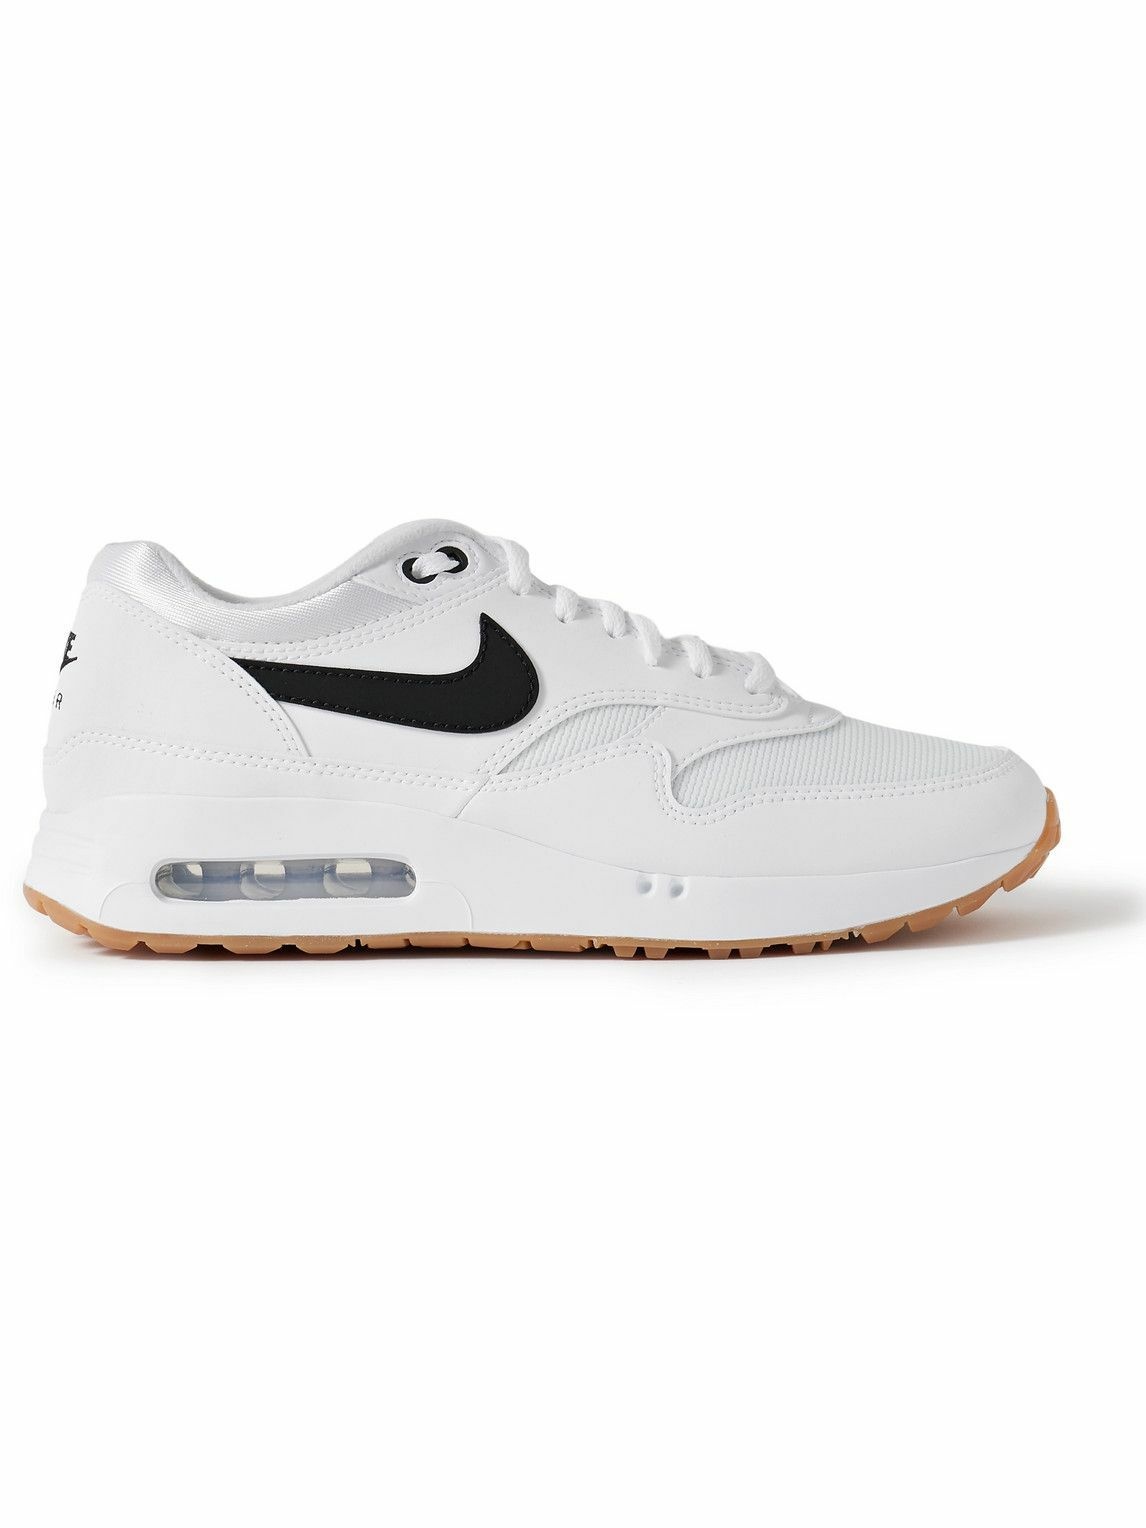 Photo: Nike Golf - Air Max 1 '86 OG G Leather and Mesh Golf Sneakers - White